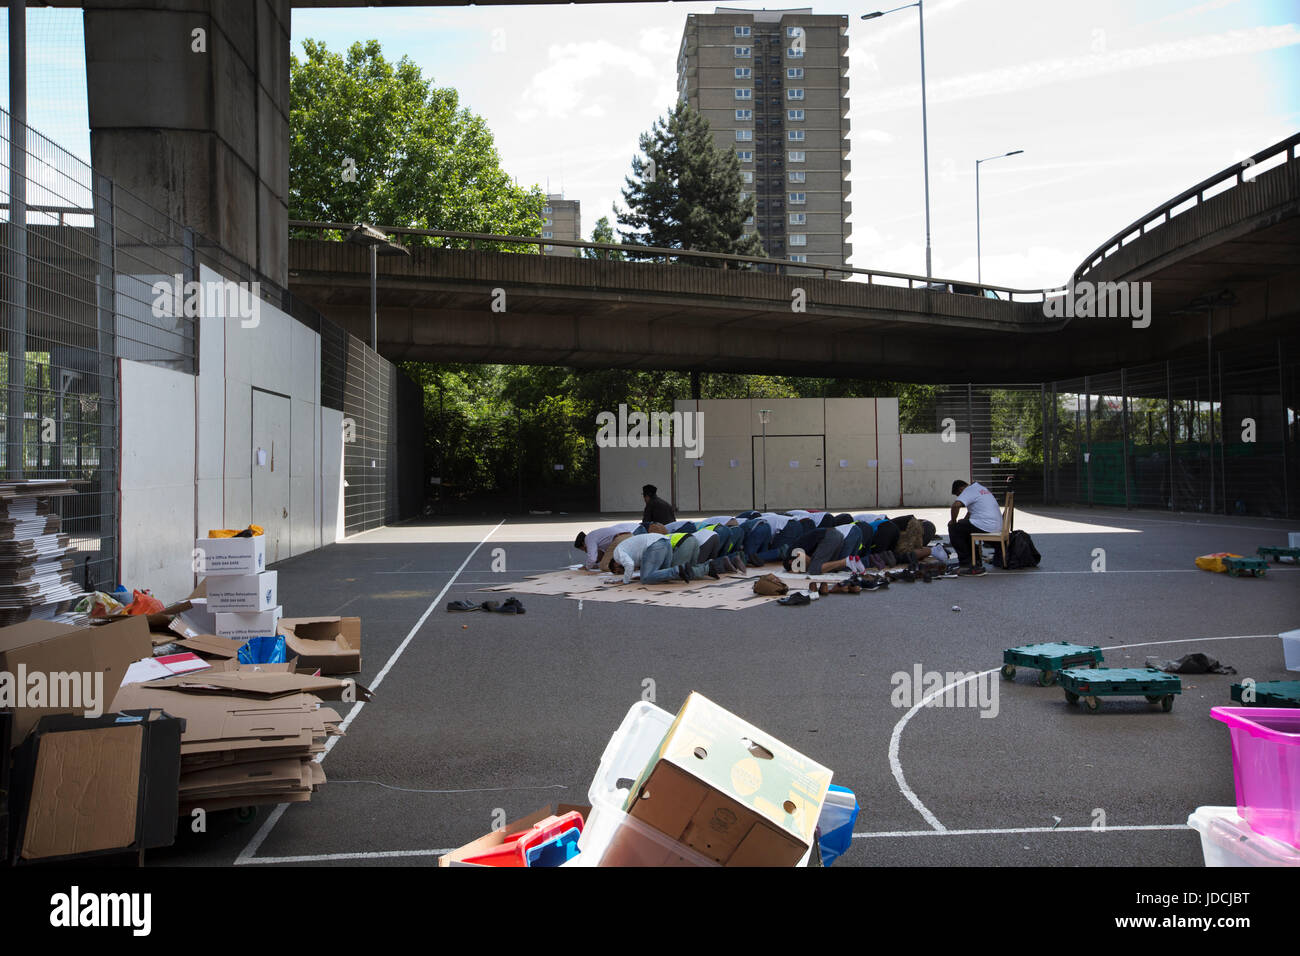 Members of the Islamic community left homeless after fire disaster praying nearby Grenfell Tower, in an area during Ramadan, West London, UK Stock Photo